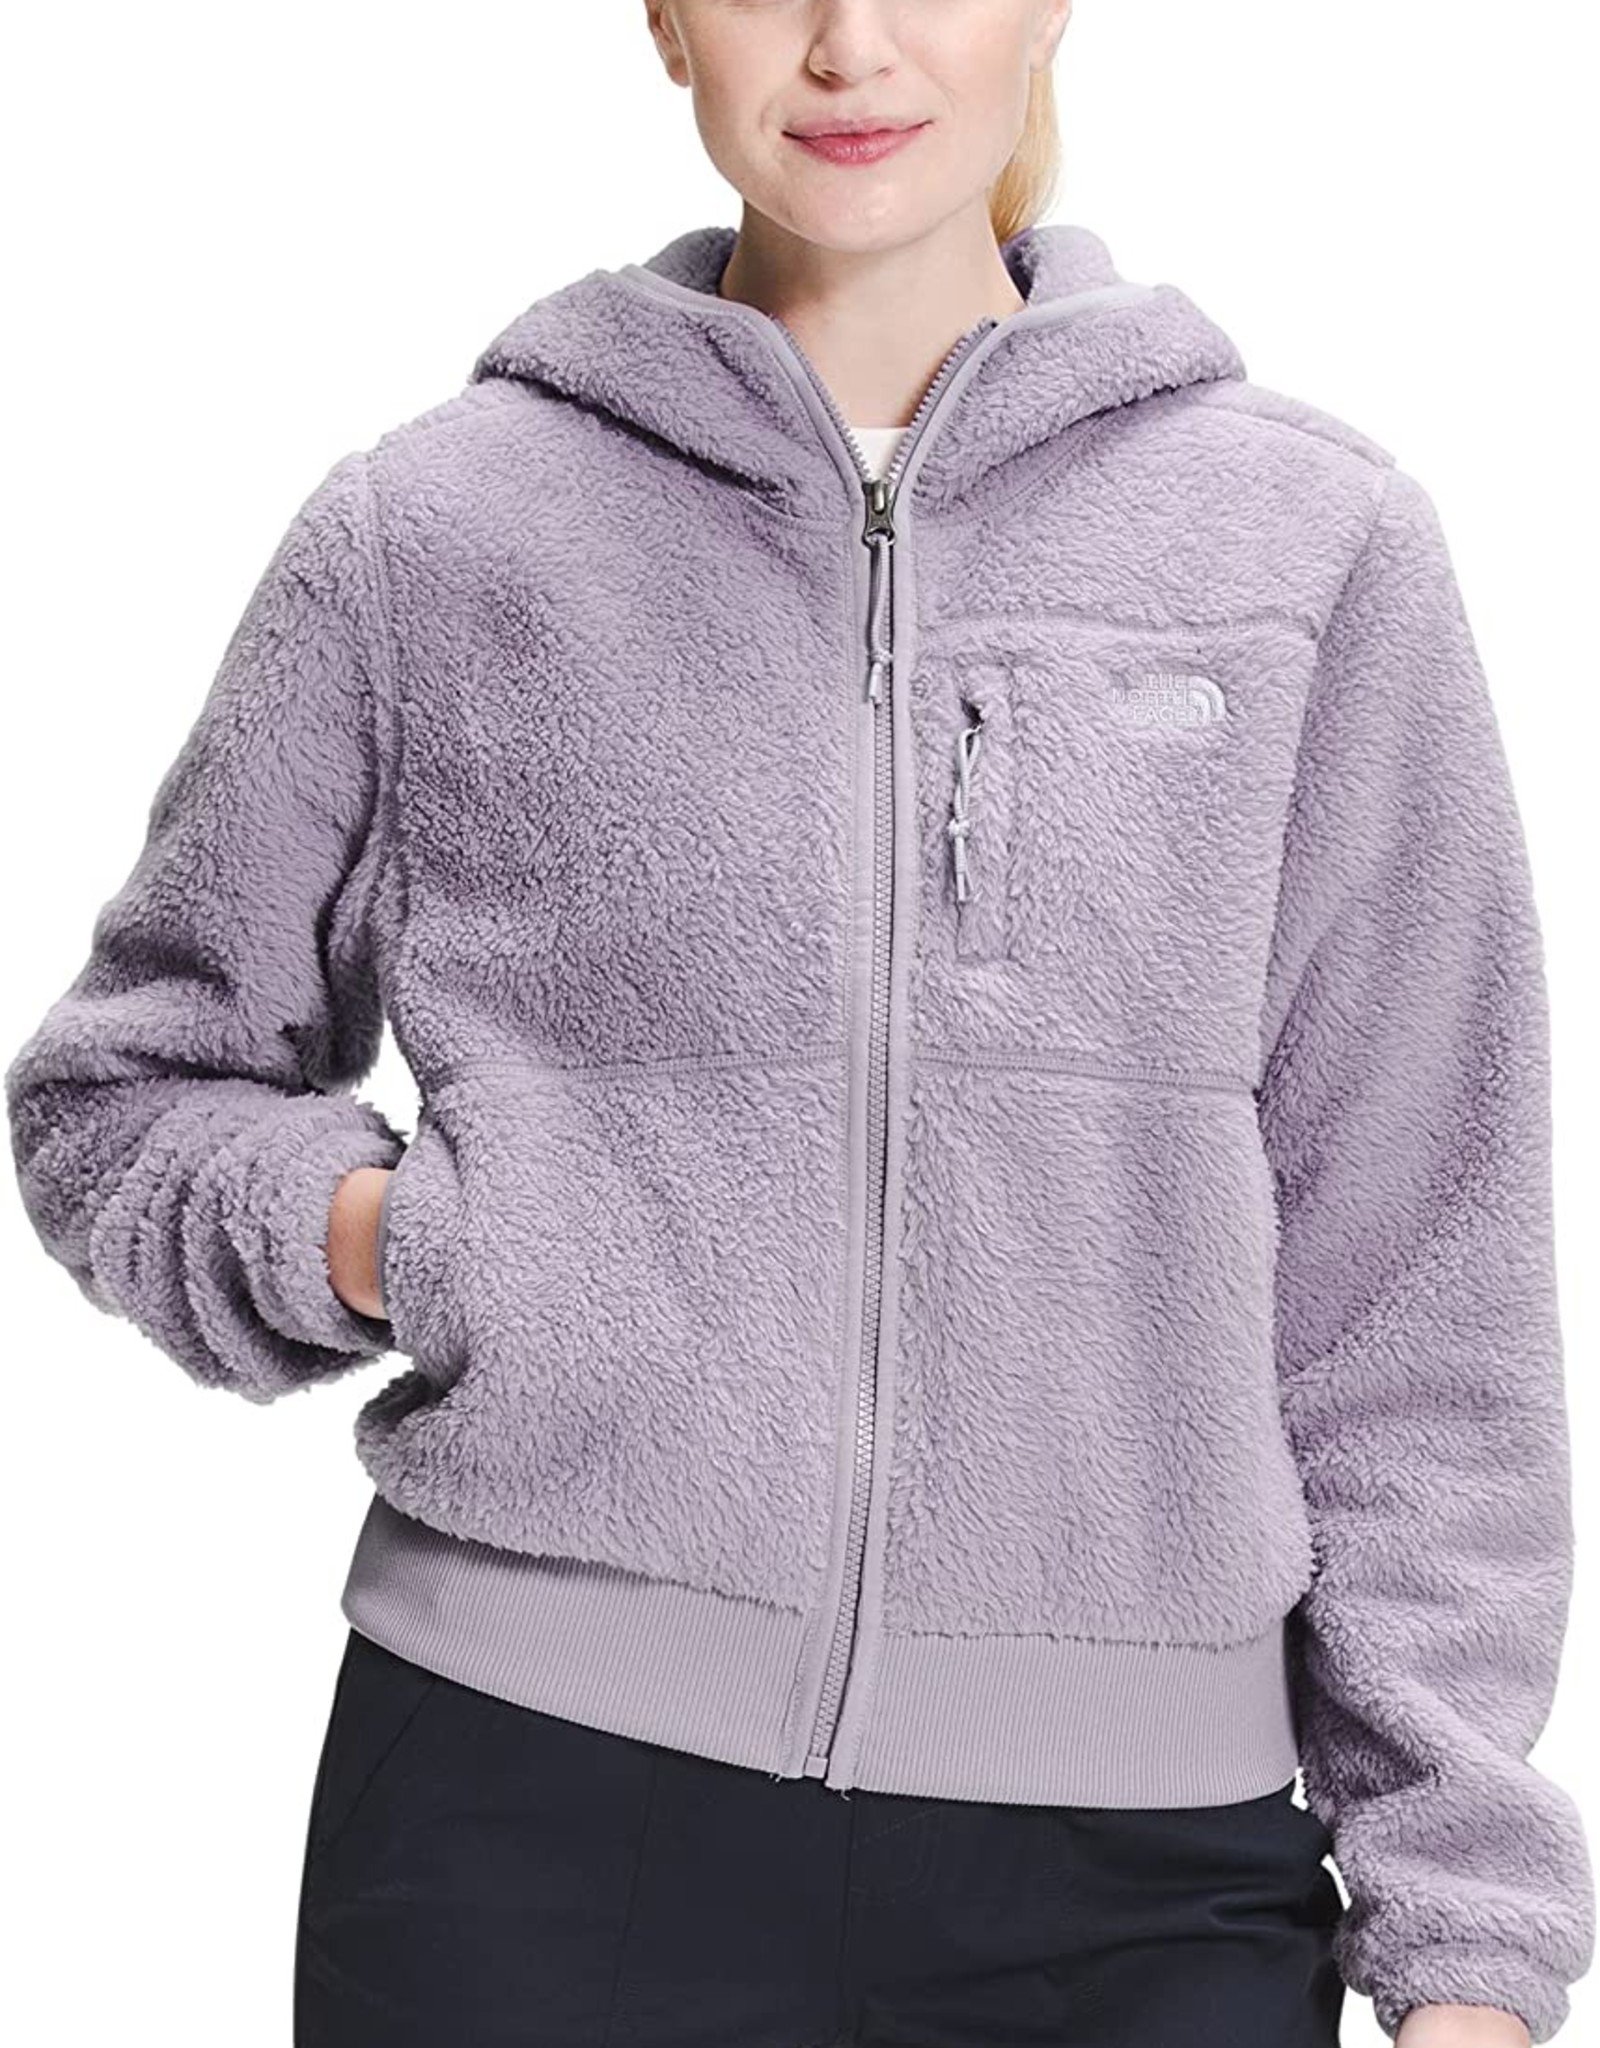 The North Face The North Face Women's Dunraven Full Zip Hoodie -W2022